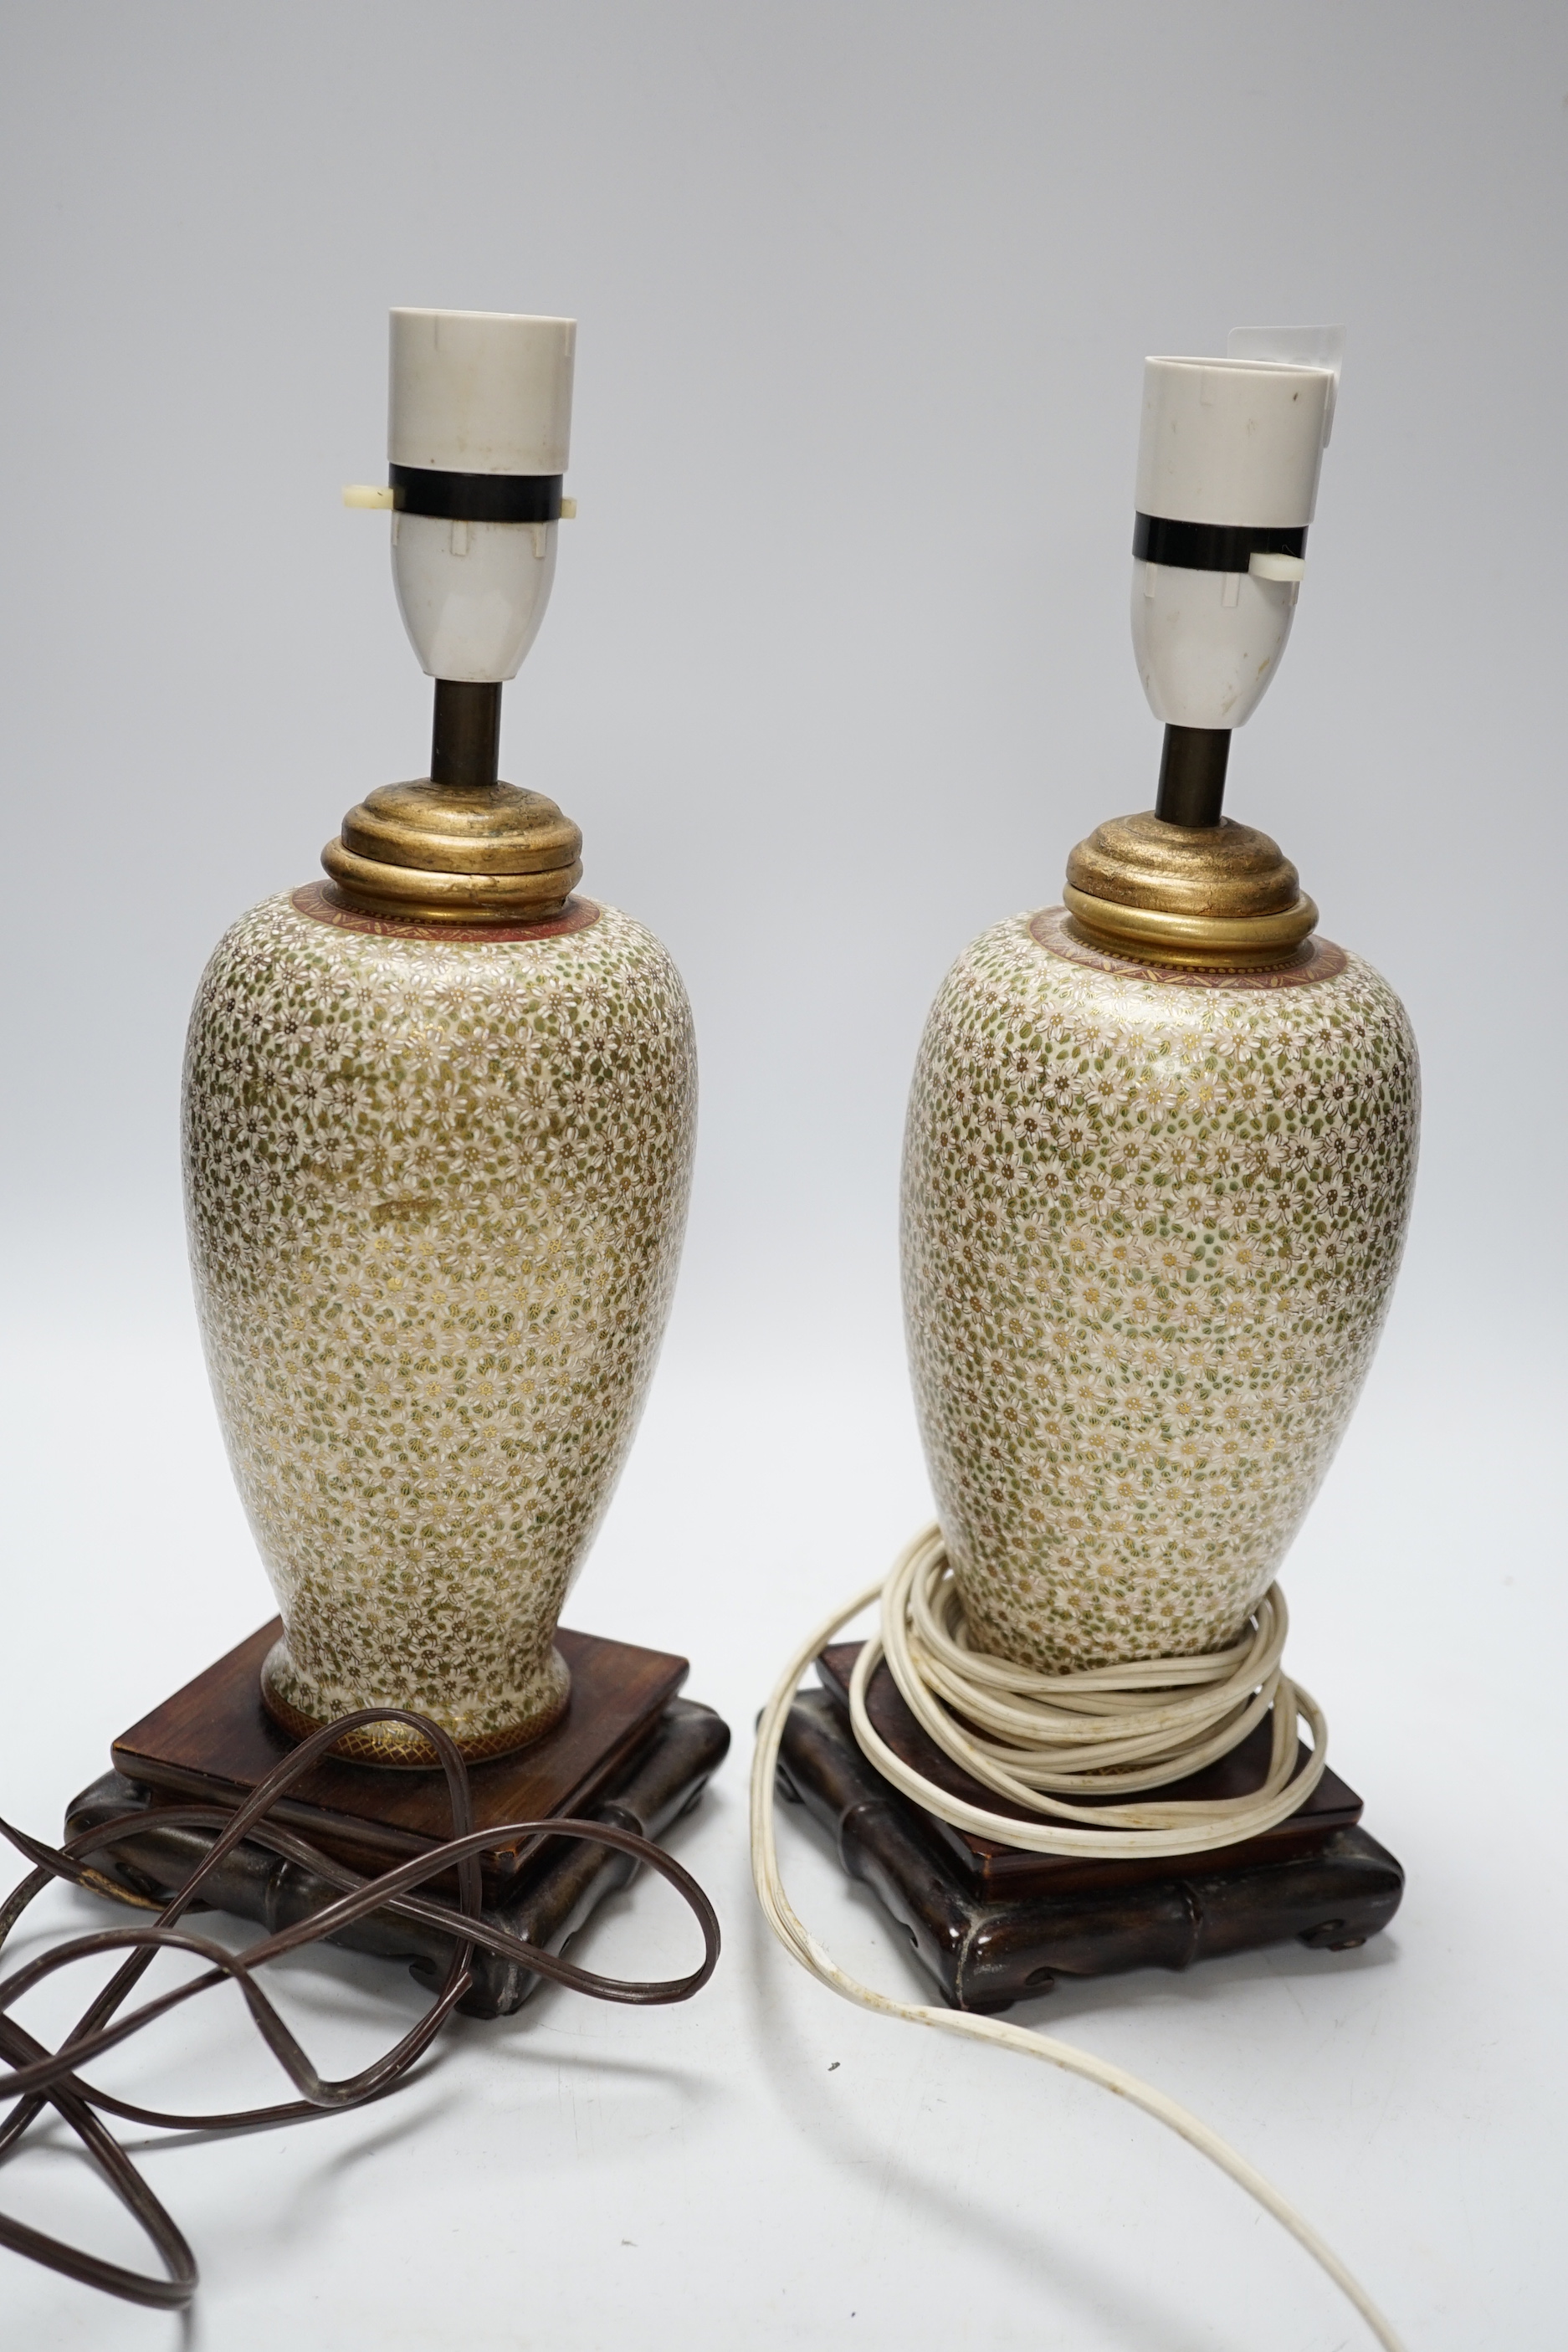 A pair of Japanese Satsuma vases mounted as lamps, total height including lamp fittings 31.5cm